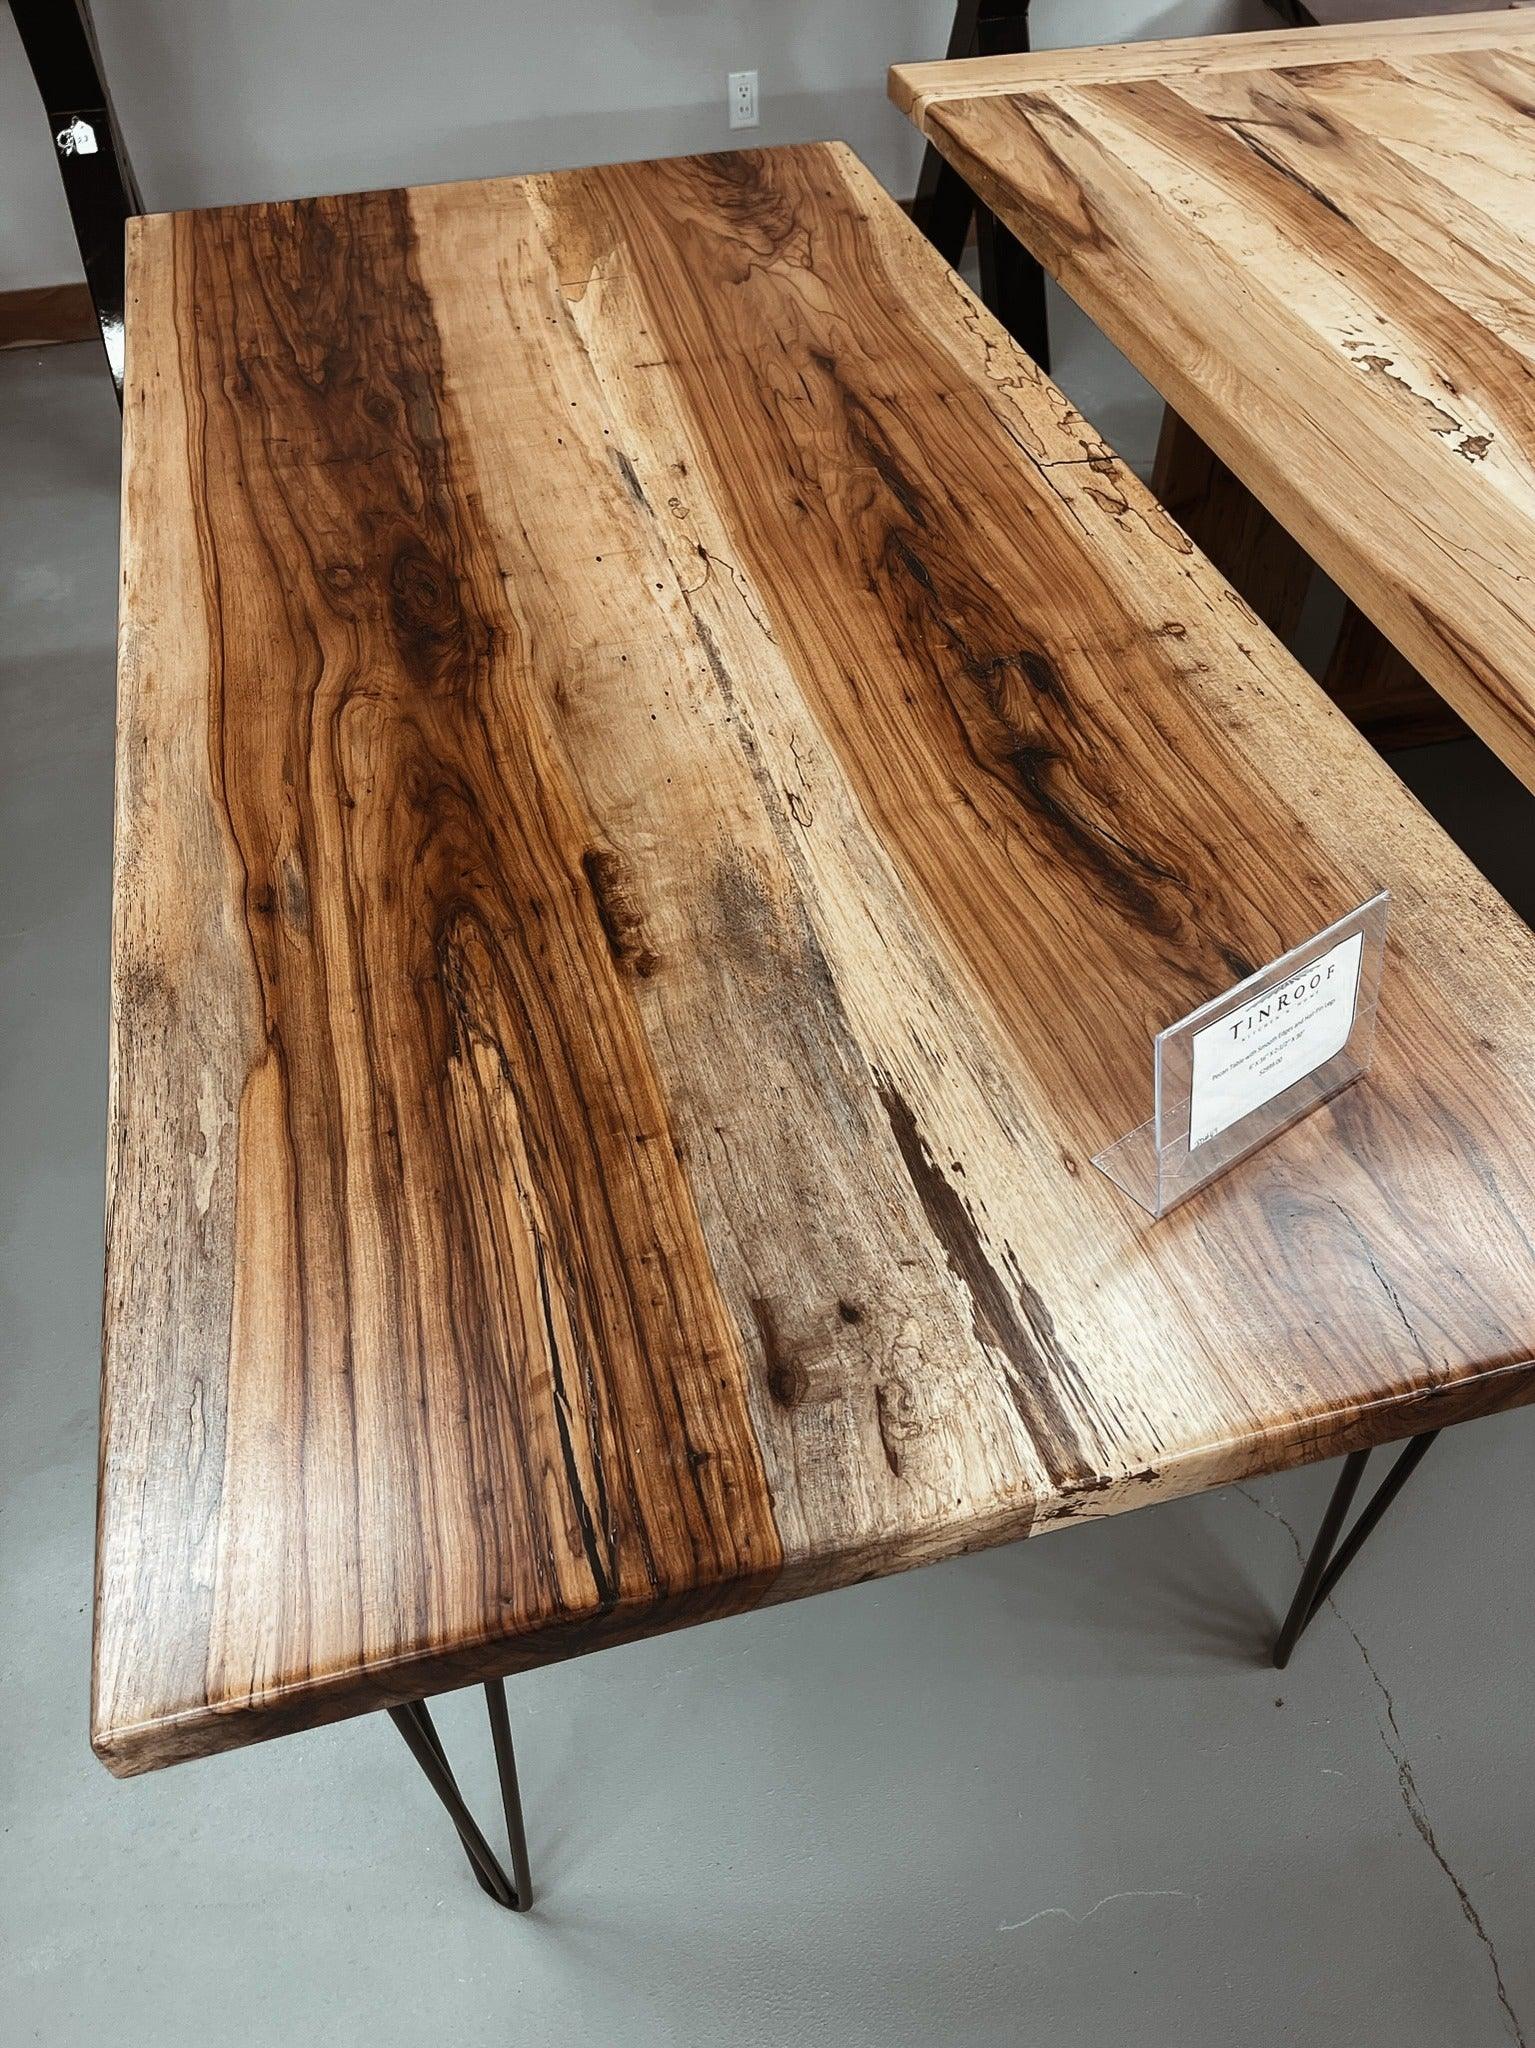 Pecan Table with Smooth Edges and Hair Pin Legs - Tin Roof Kitchen & Home